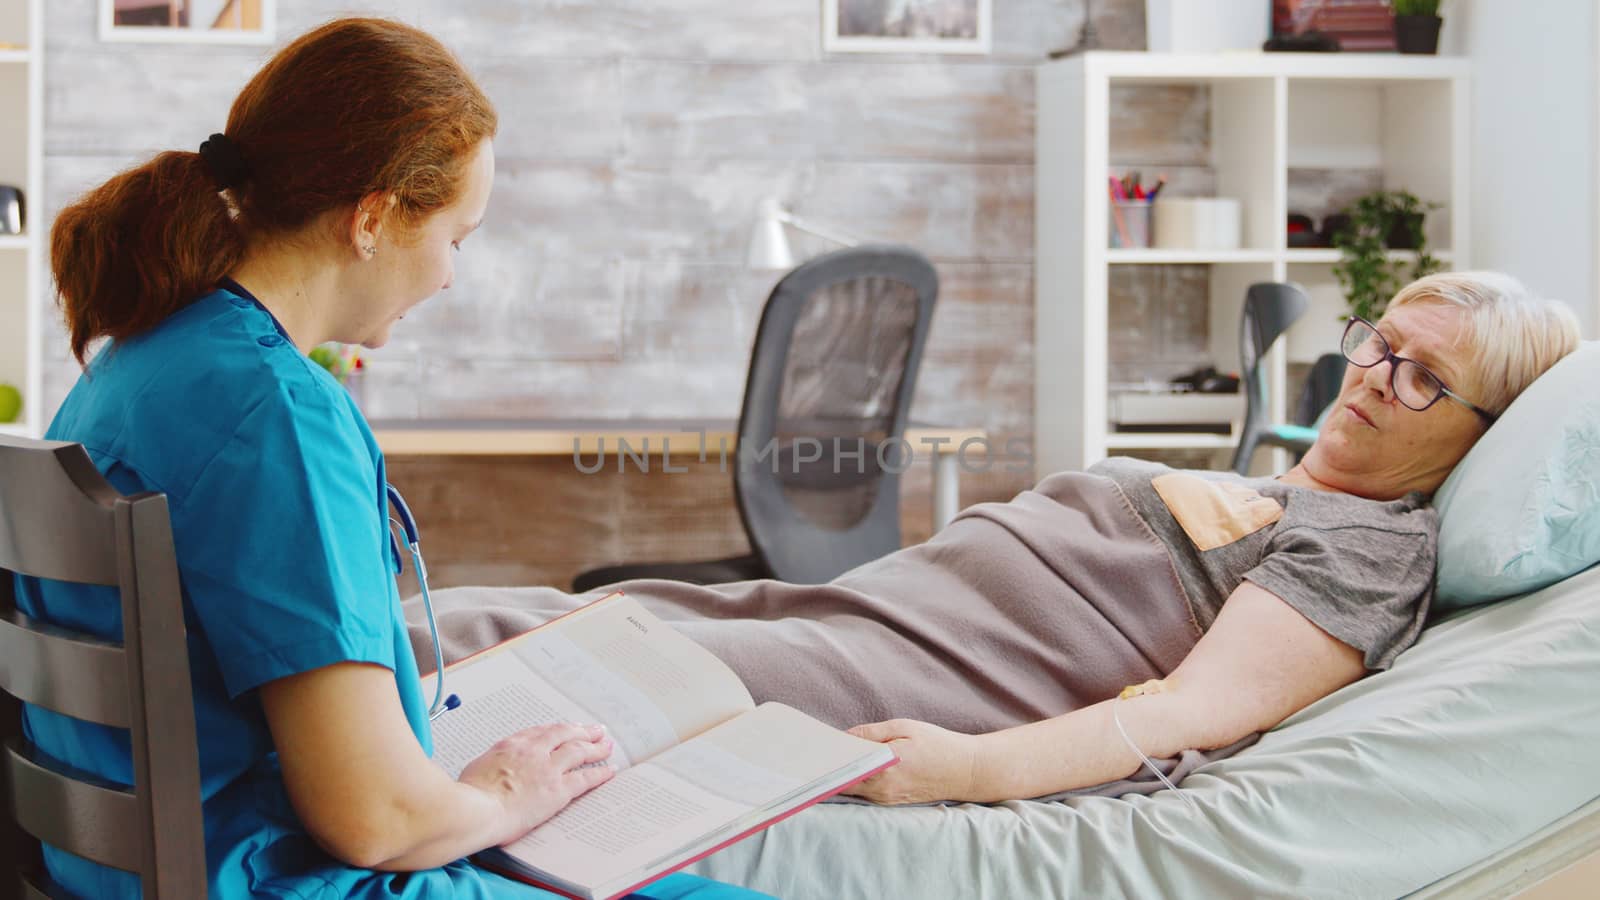 Revealing shot of an old lady lying in hospital bed while a nurse is reading a book to her by DCStudio